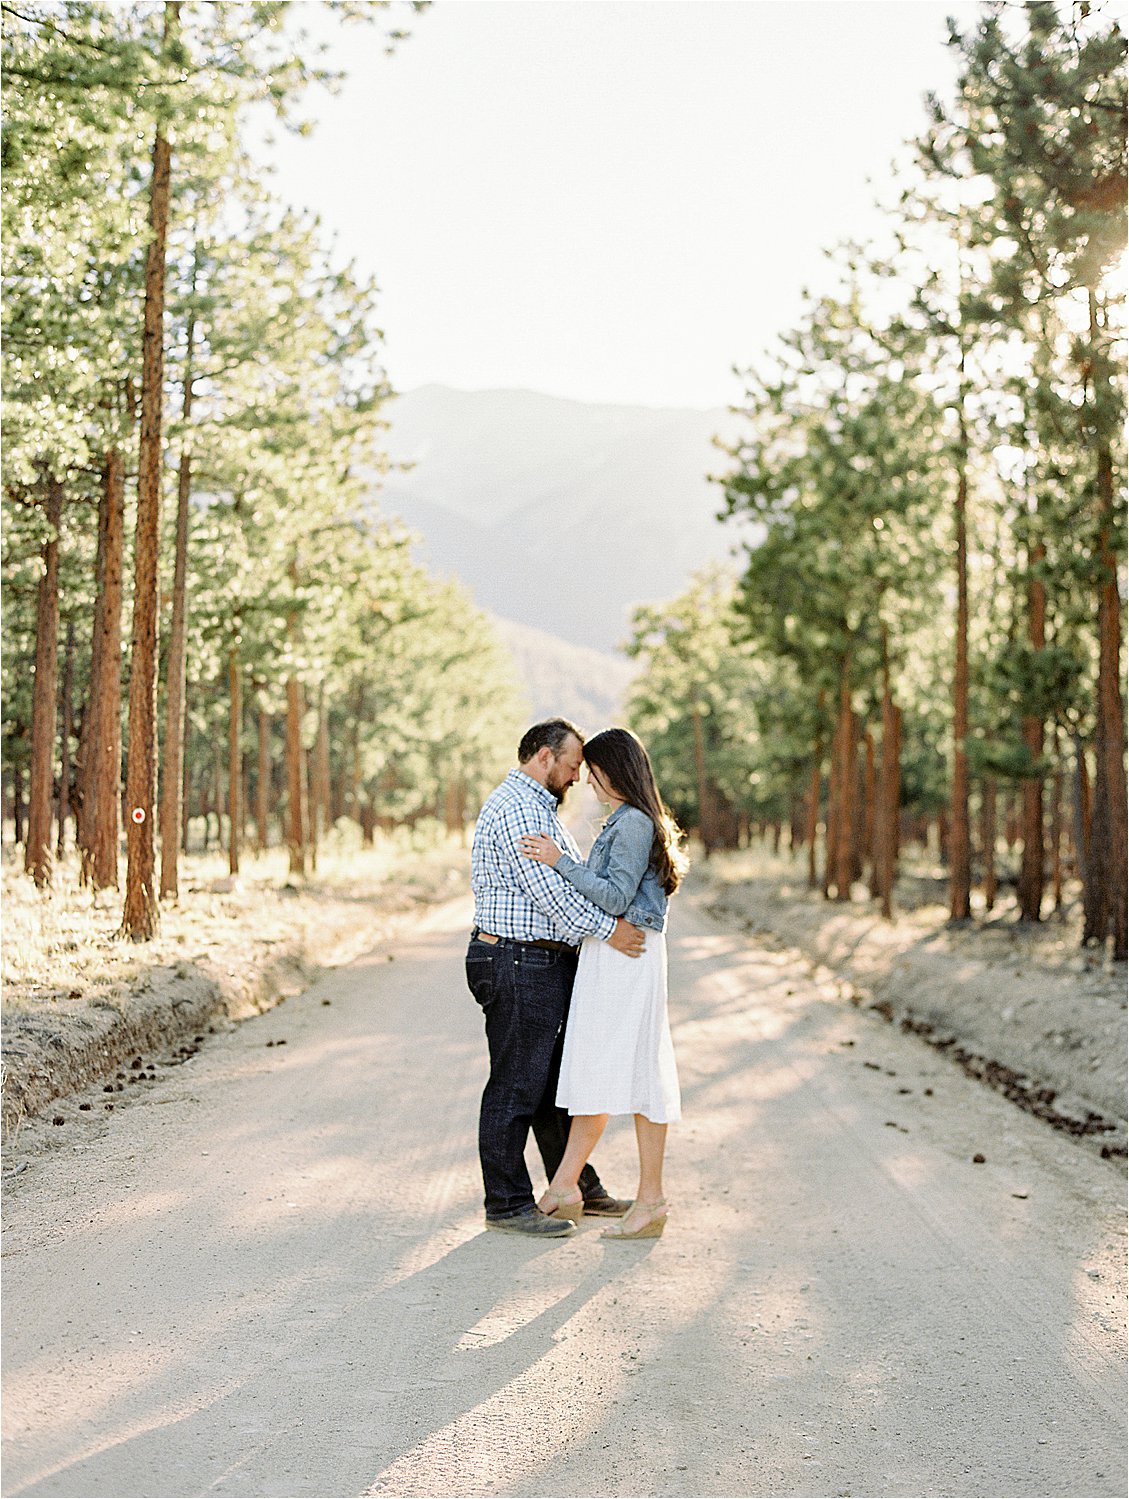 Forest Engagement Session by Destination Film Wedding Photographer, Renee Hollingshead